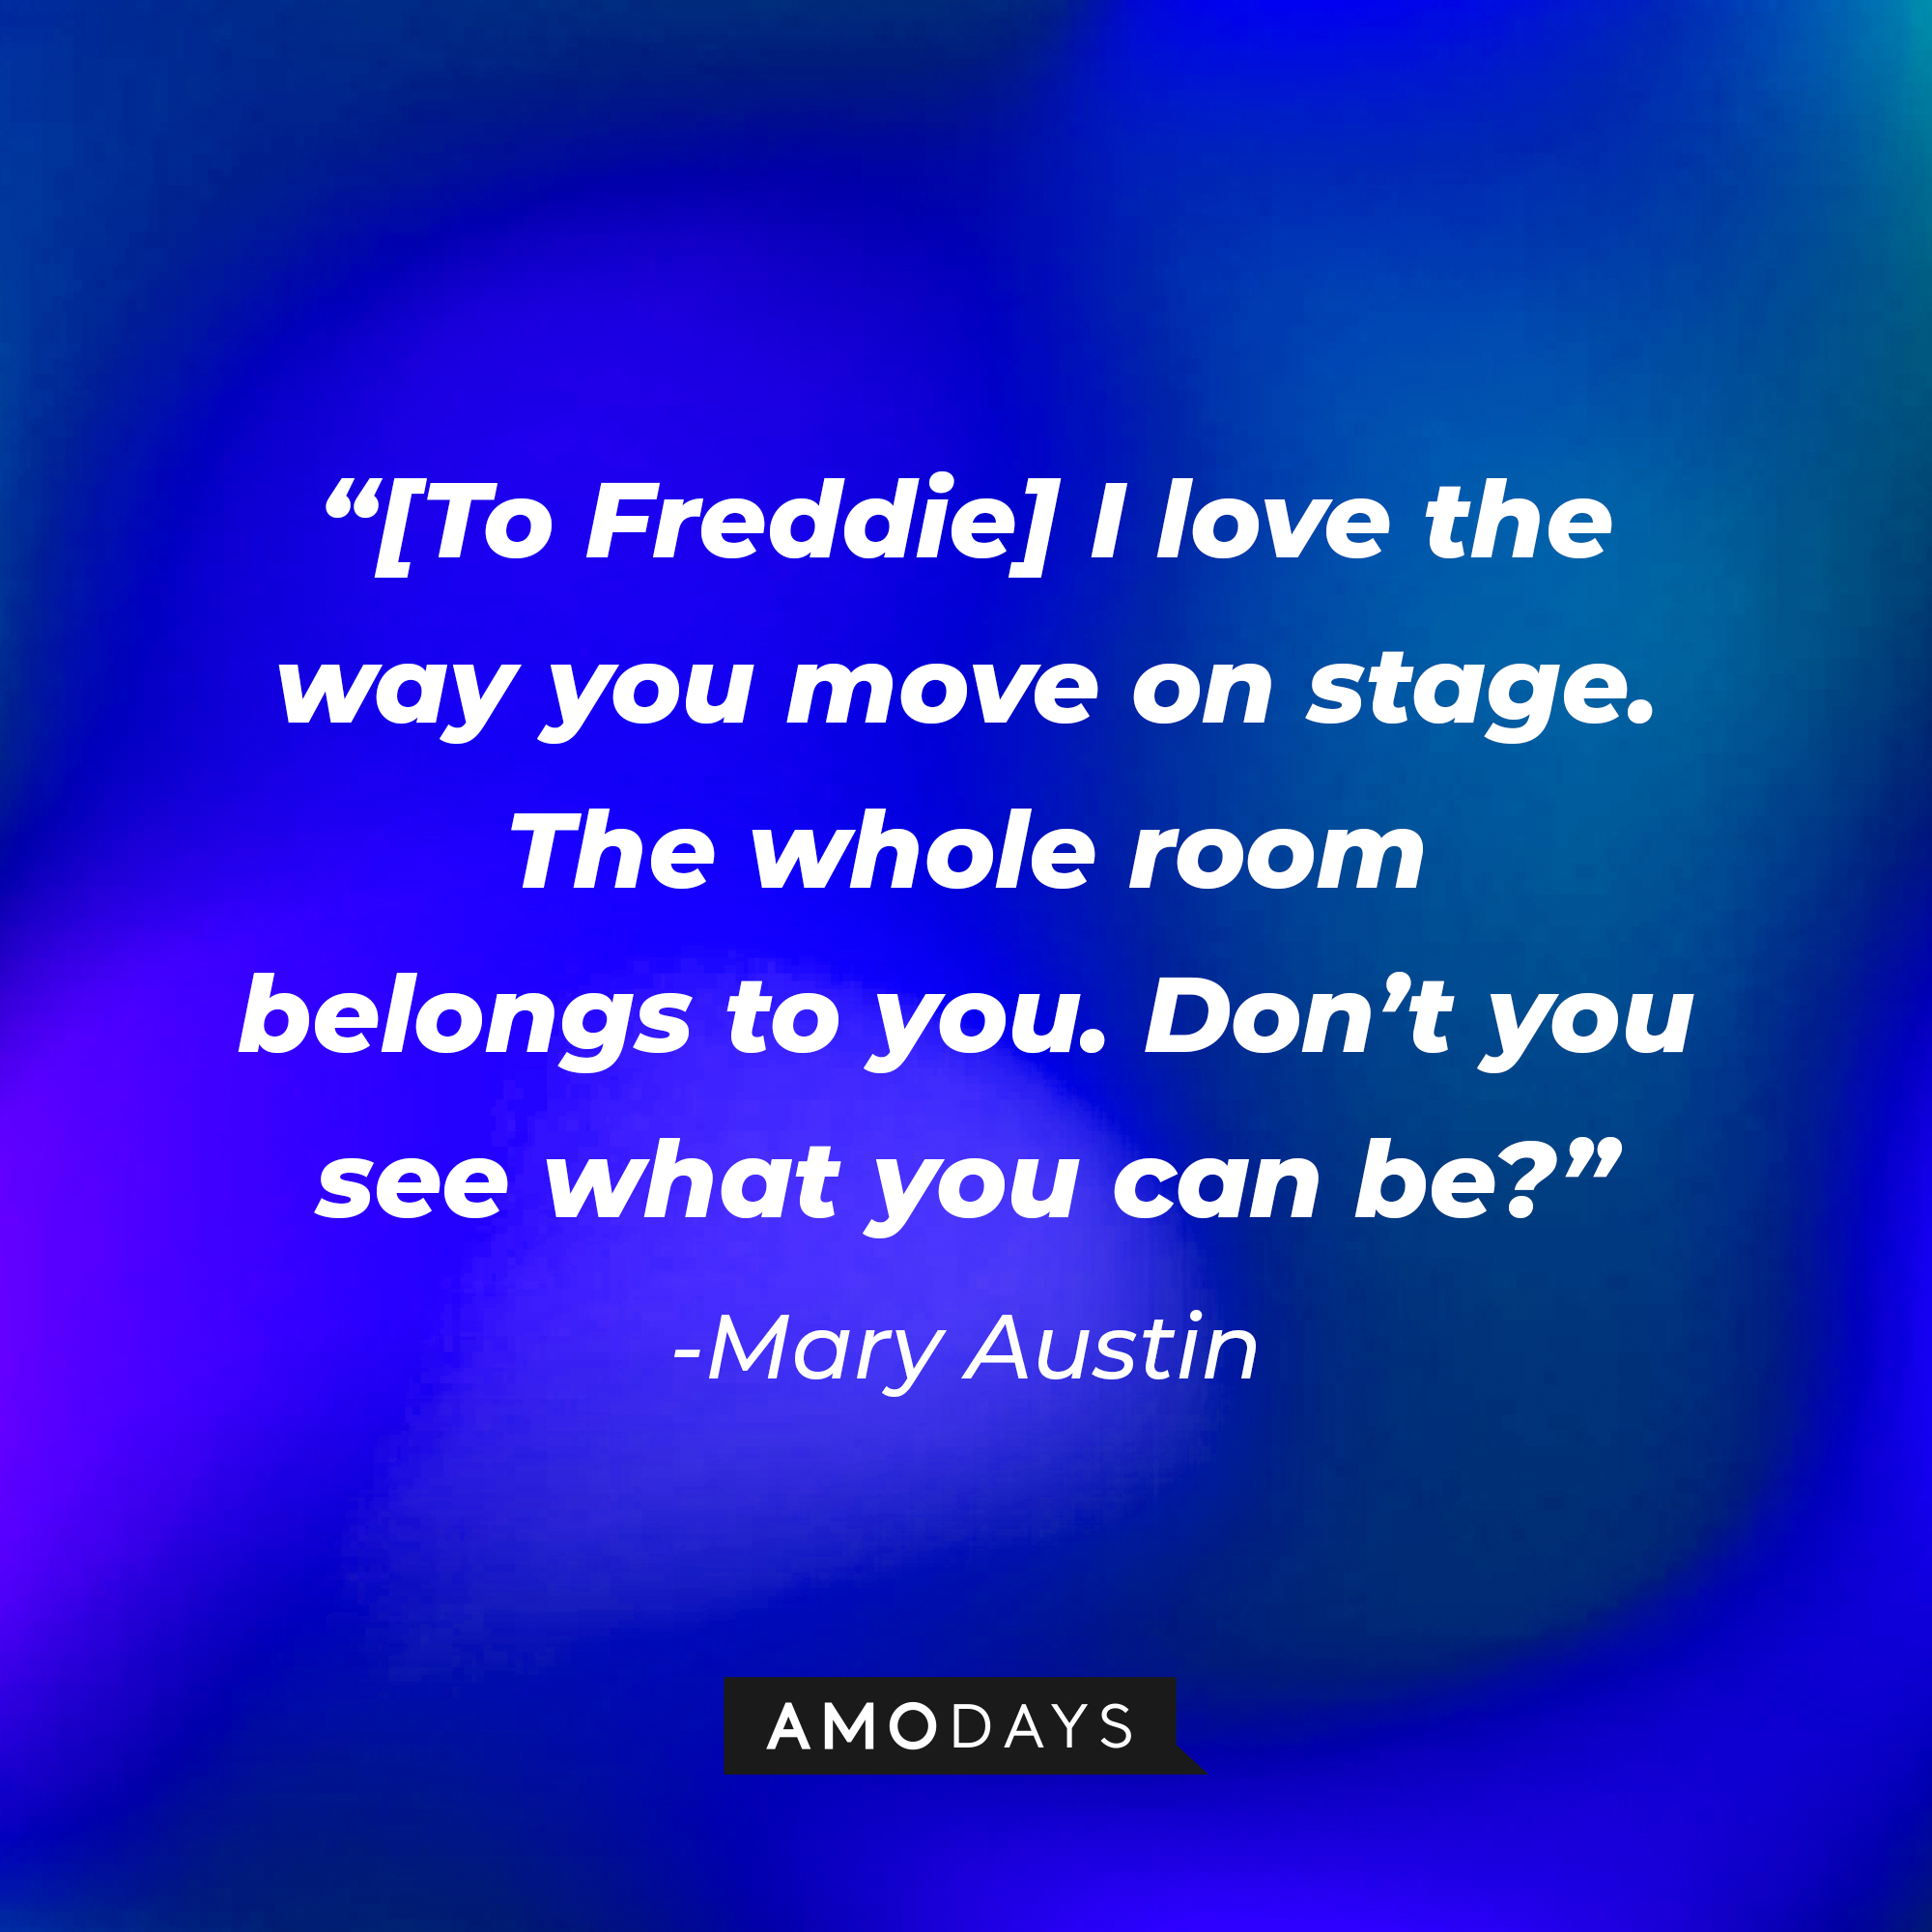 Mary Austin with her quote: "[To Freddie] I love the way you move on stage. The whole room belongs to you. Don't you see what you can be?" | Source: Amodays